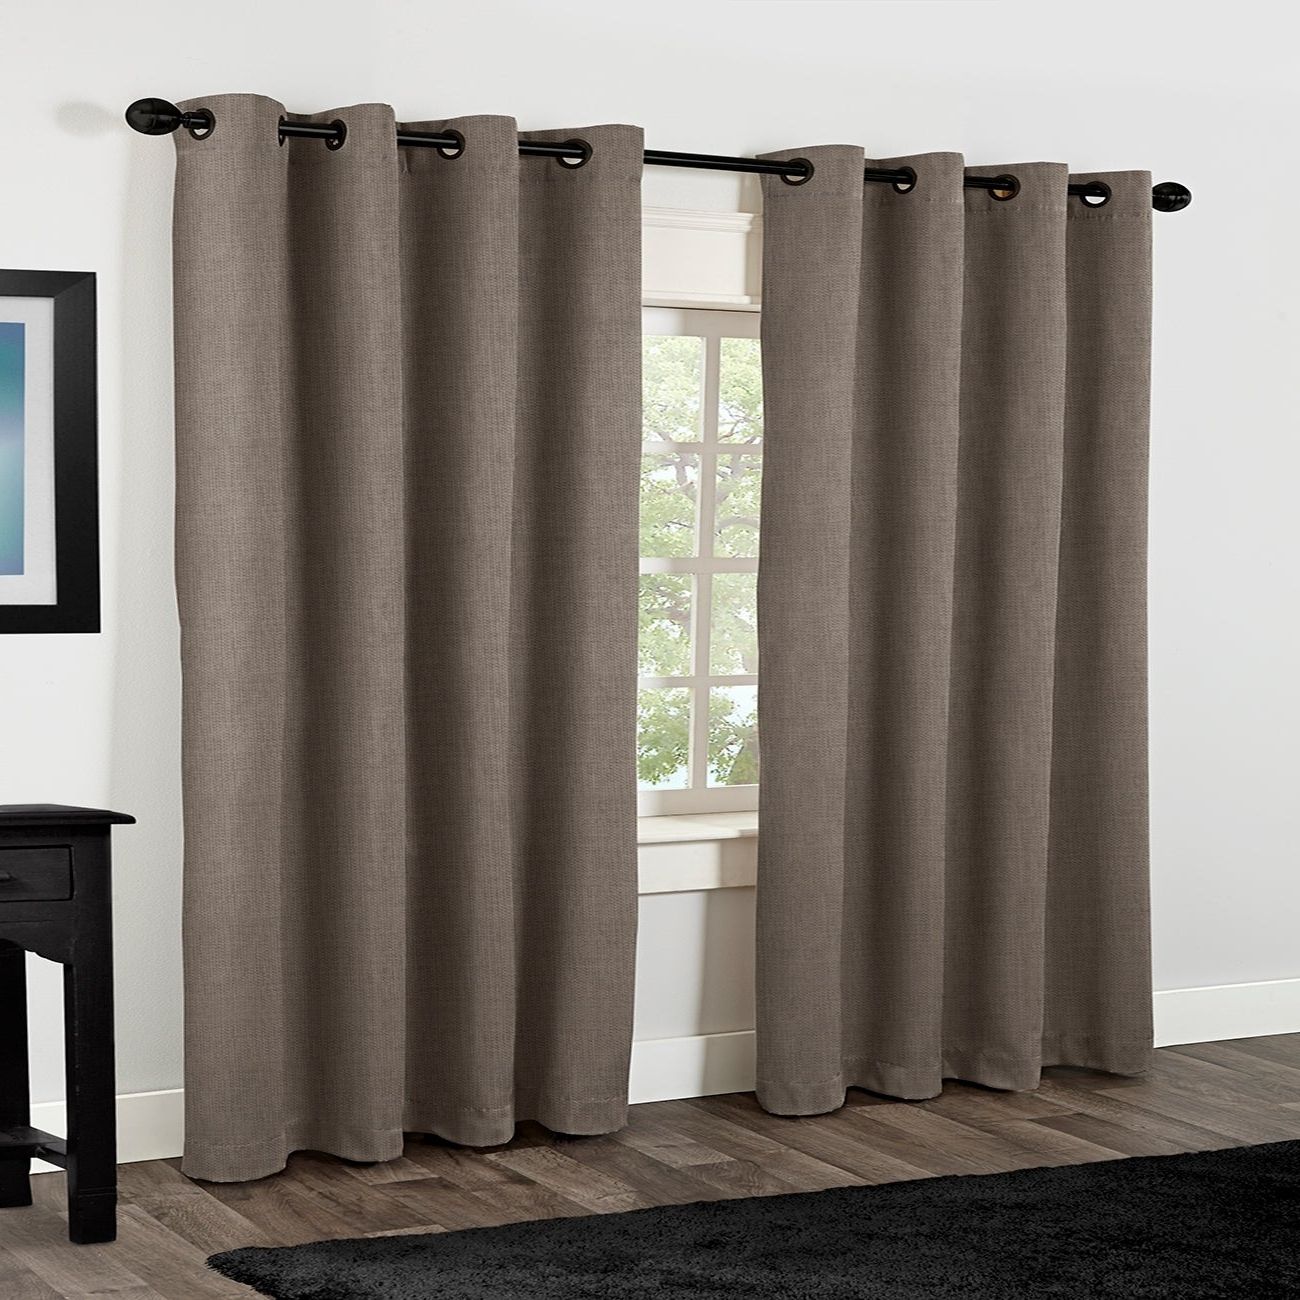 The Gray Barn Dreamweaver Textured Grommet Top Curtain Panel Pair Inside Most Popular The Gray Barn Gila Curtain Panel Pairs (View 11 of 20)